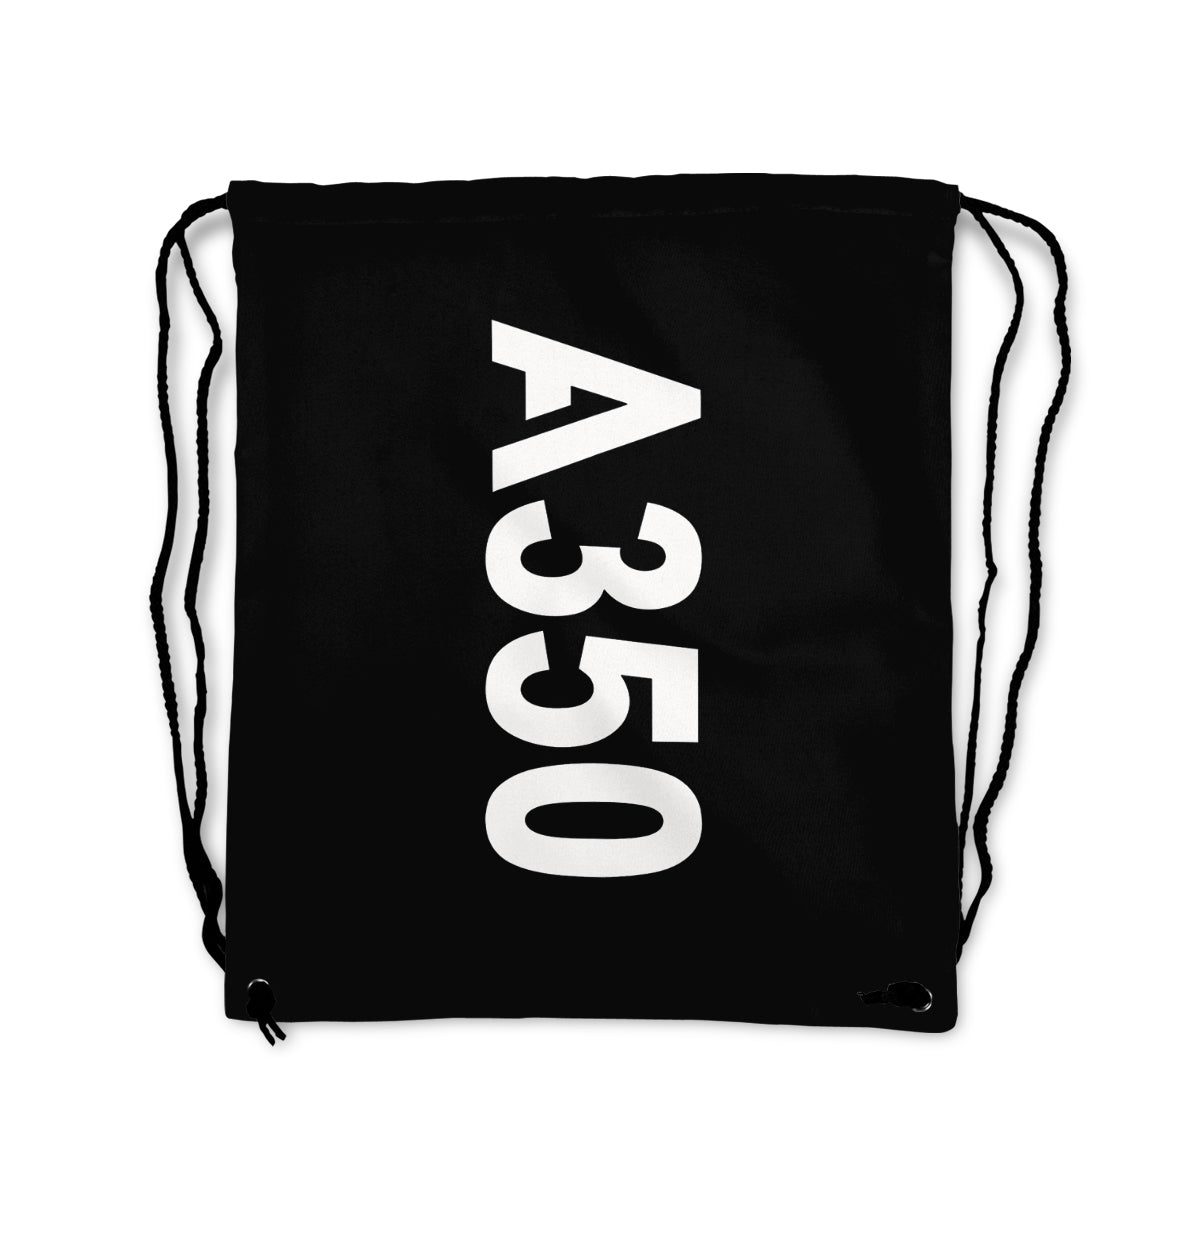 A350 Text Designed Drawstring Bags